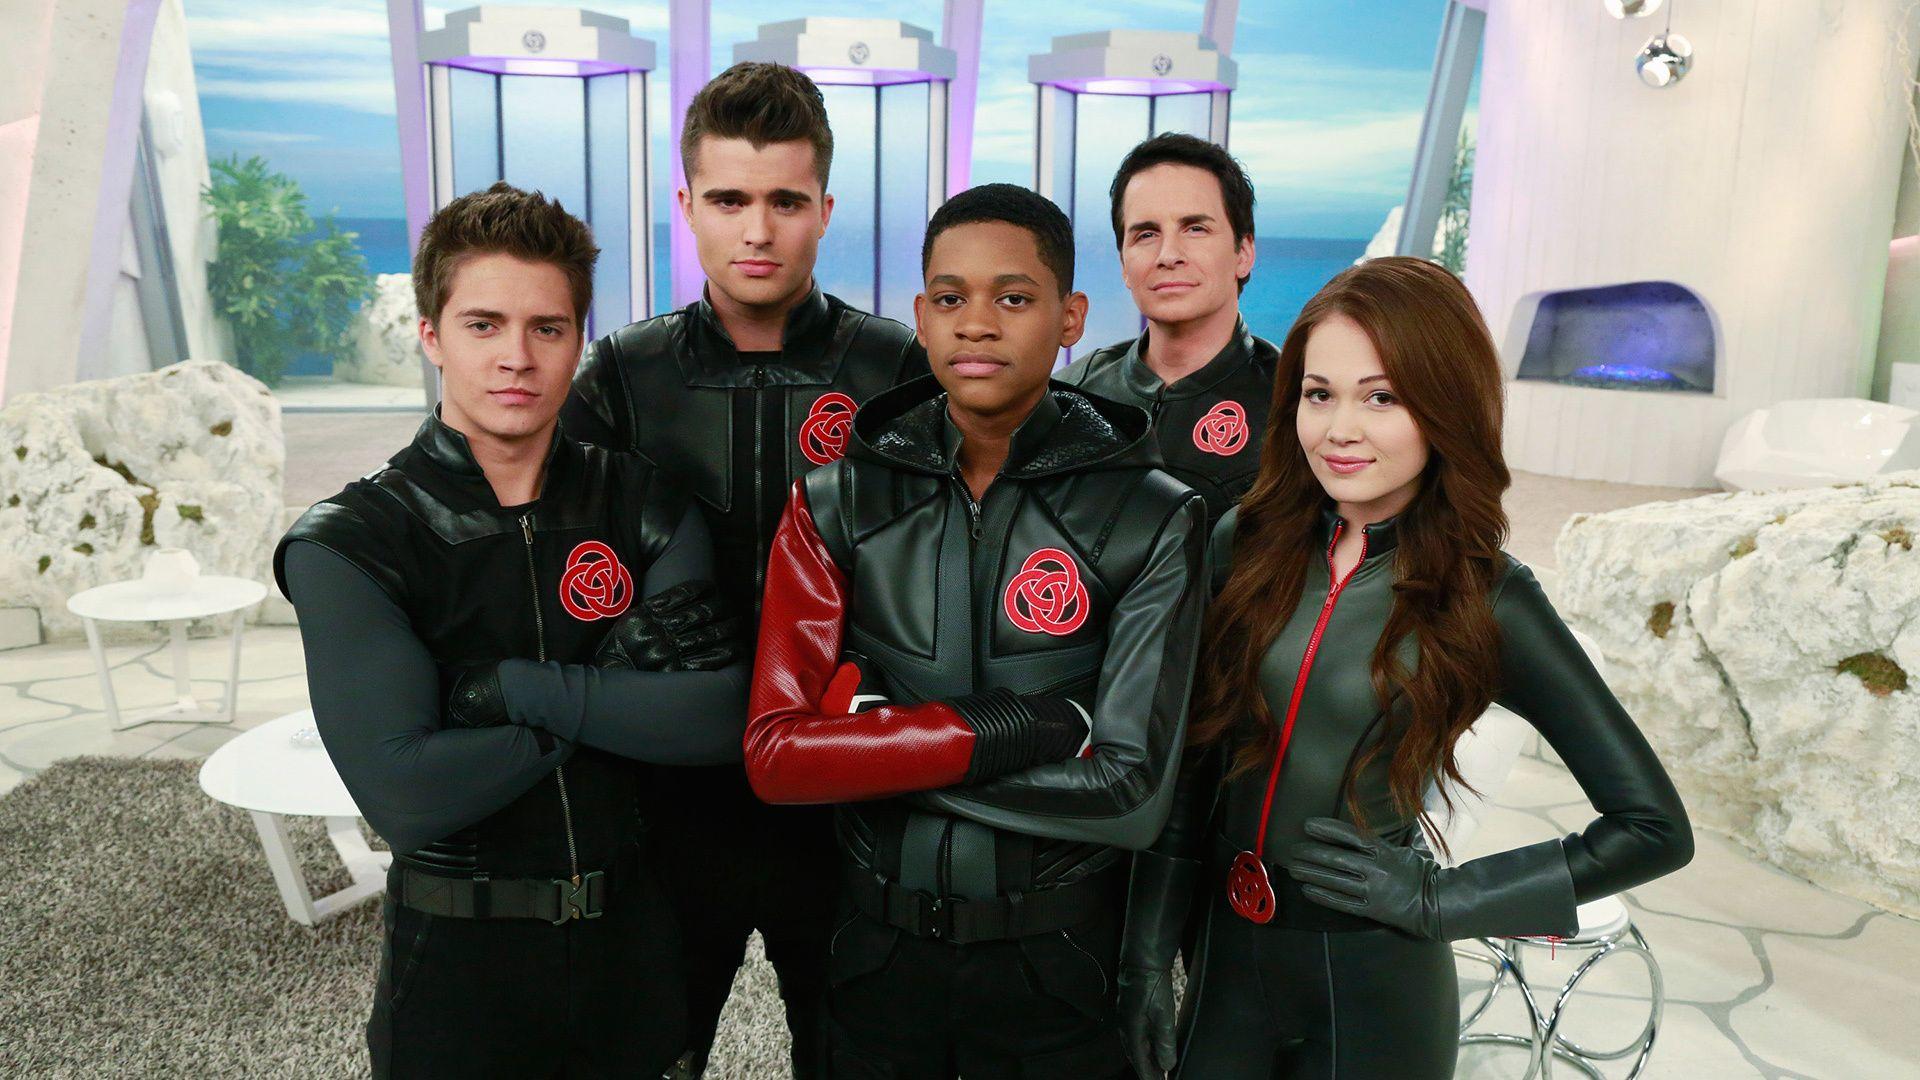 Lab Rats Wallpapers